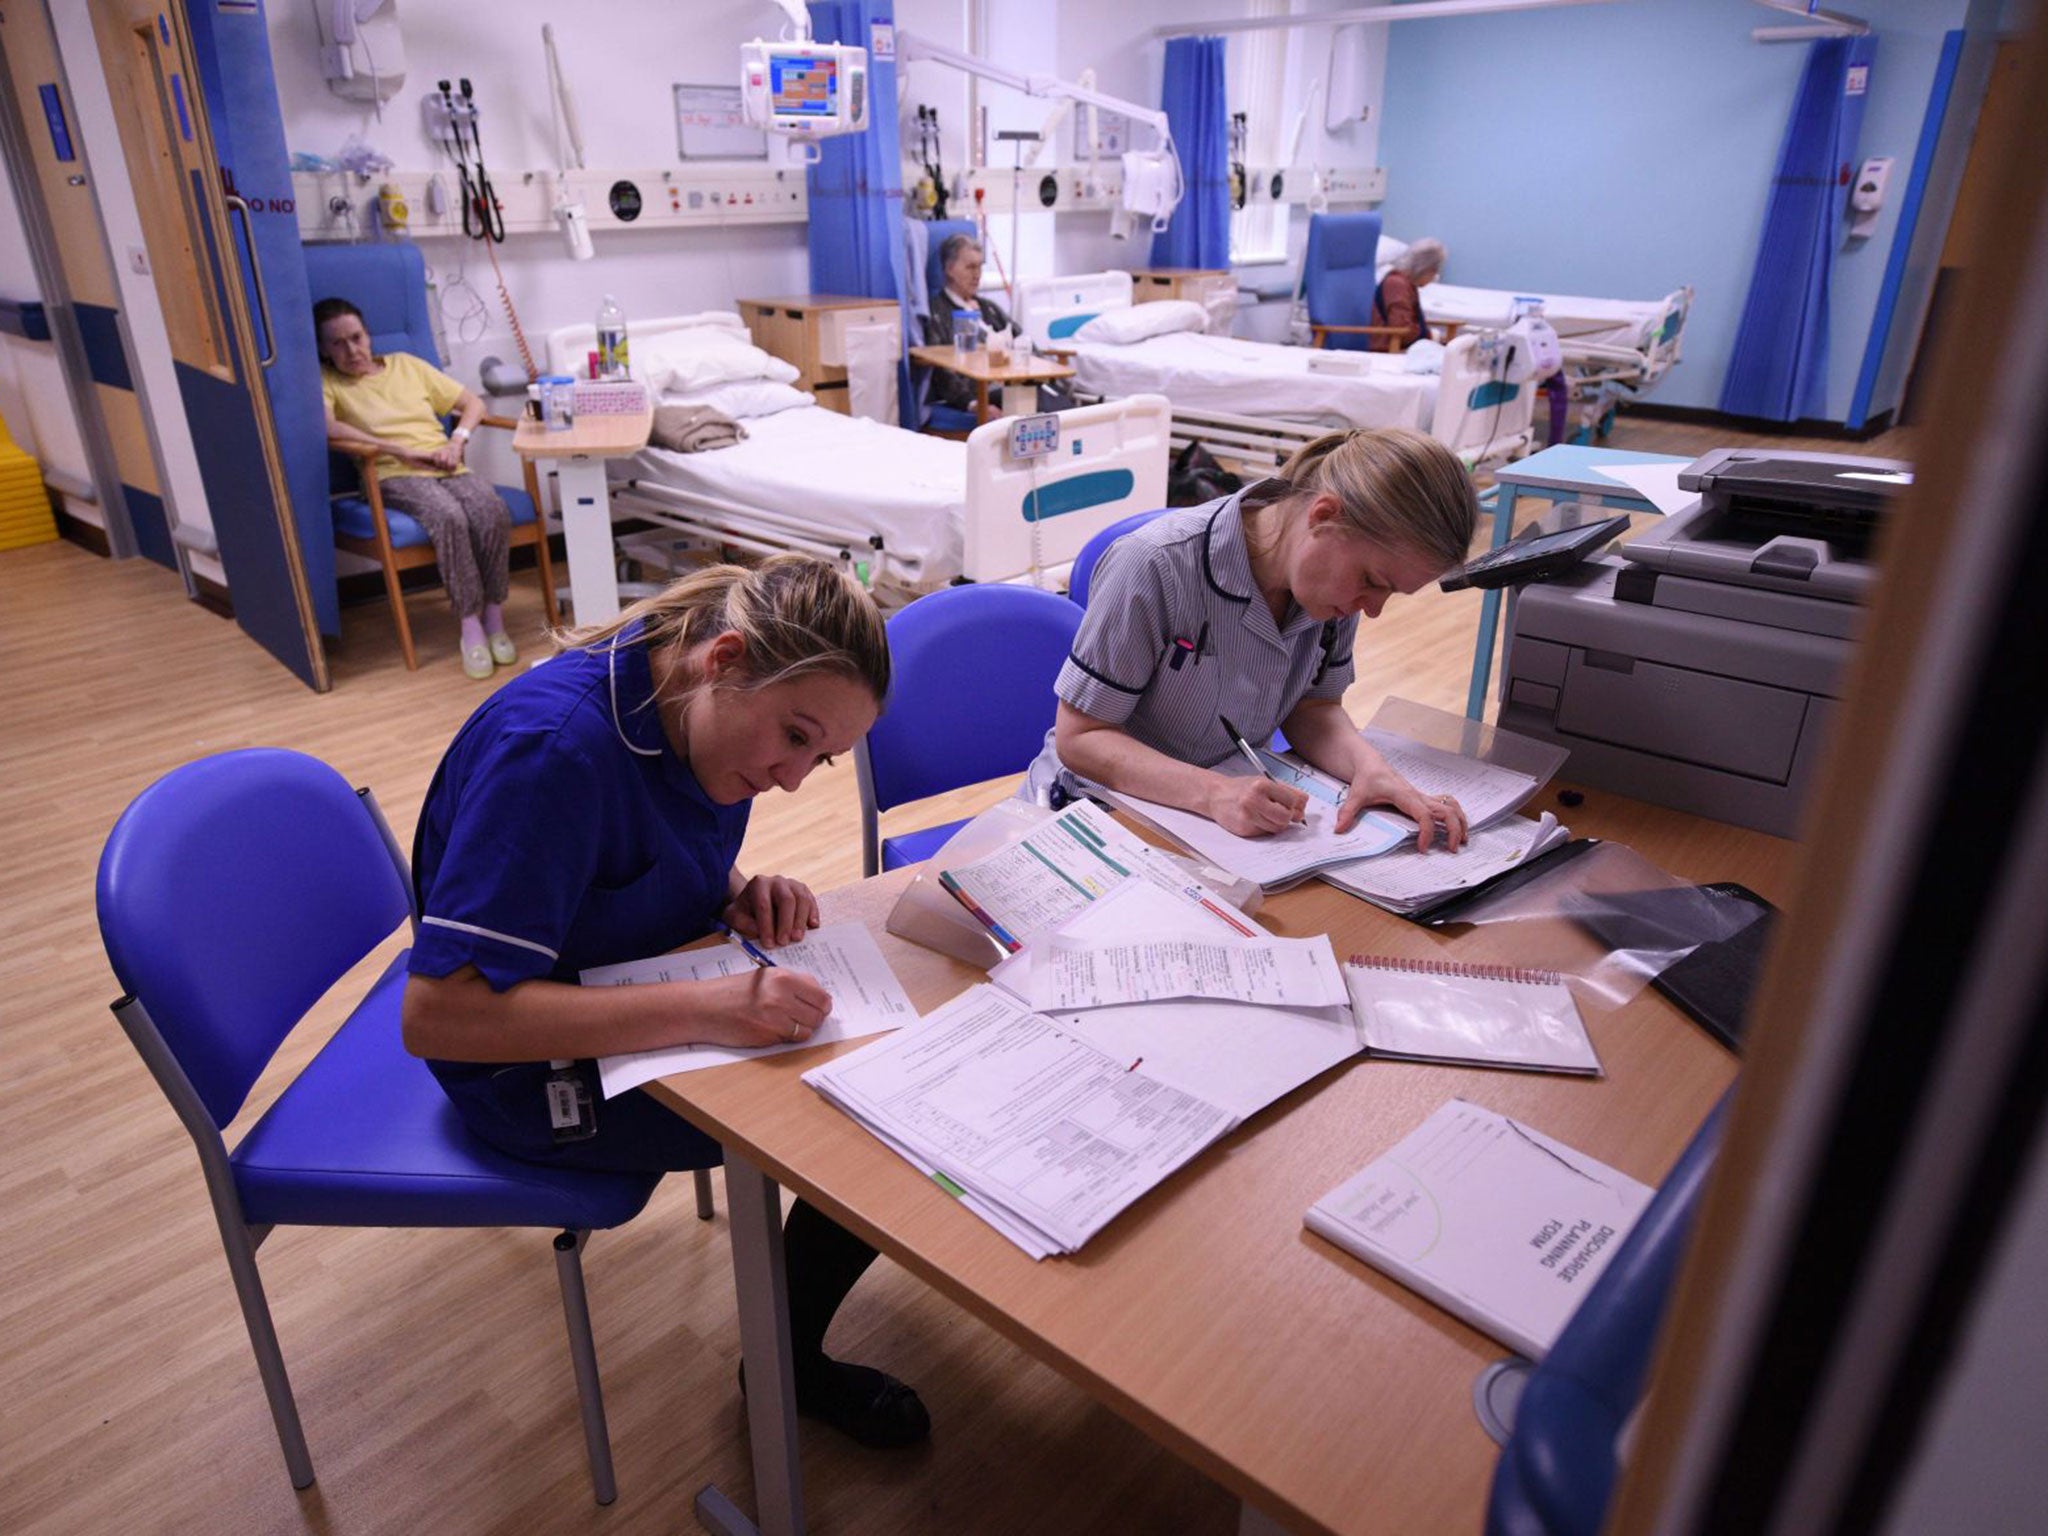 Members of clinical staff complete paperwork in the Accident and Emergency department of the 'Royal Albert Edward Infirmary' in Wigan